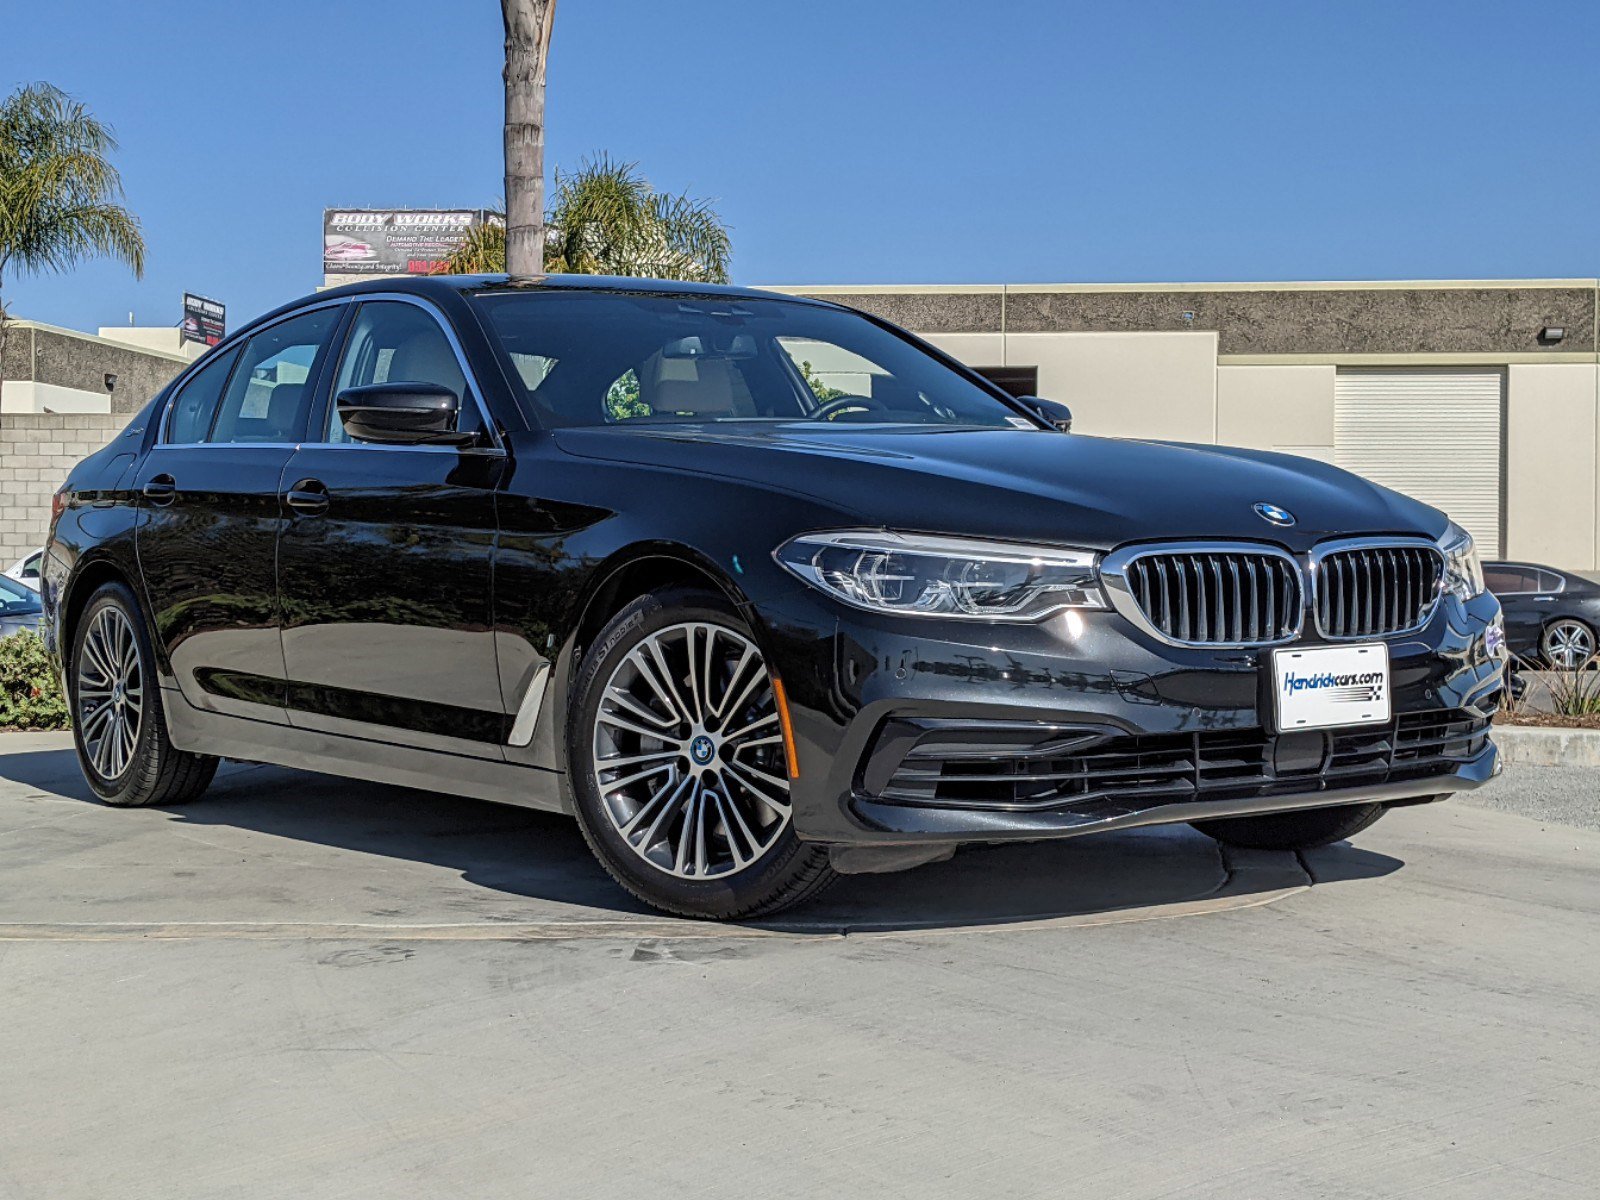 Pre-Owned 2019 BMW 5 Series 530e iPerformance Sedan in Cary #PS8352 |  Hendrick Buick GMC Cary